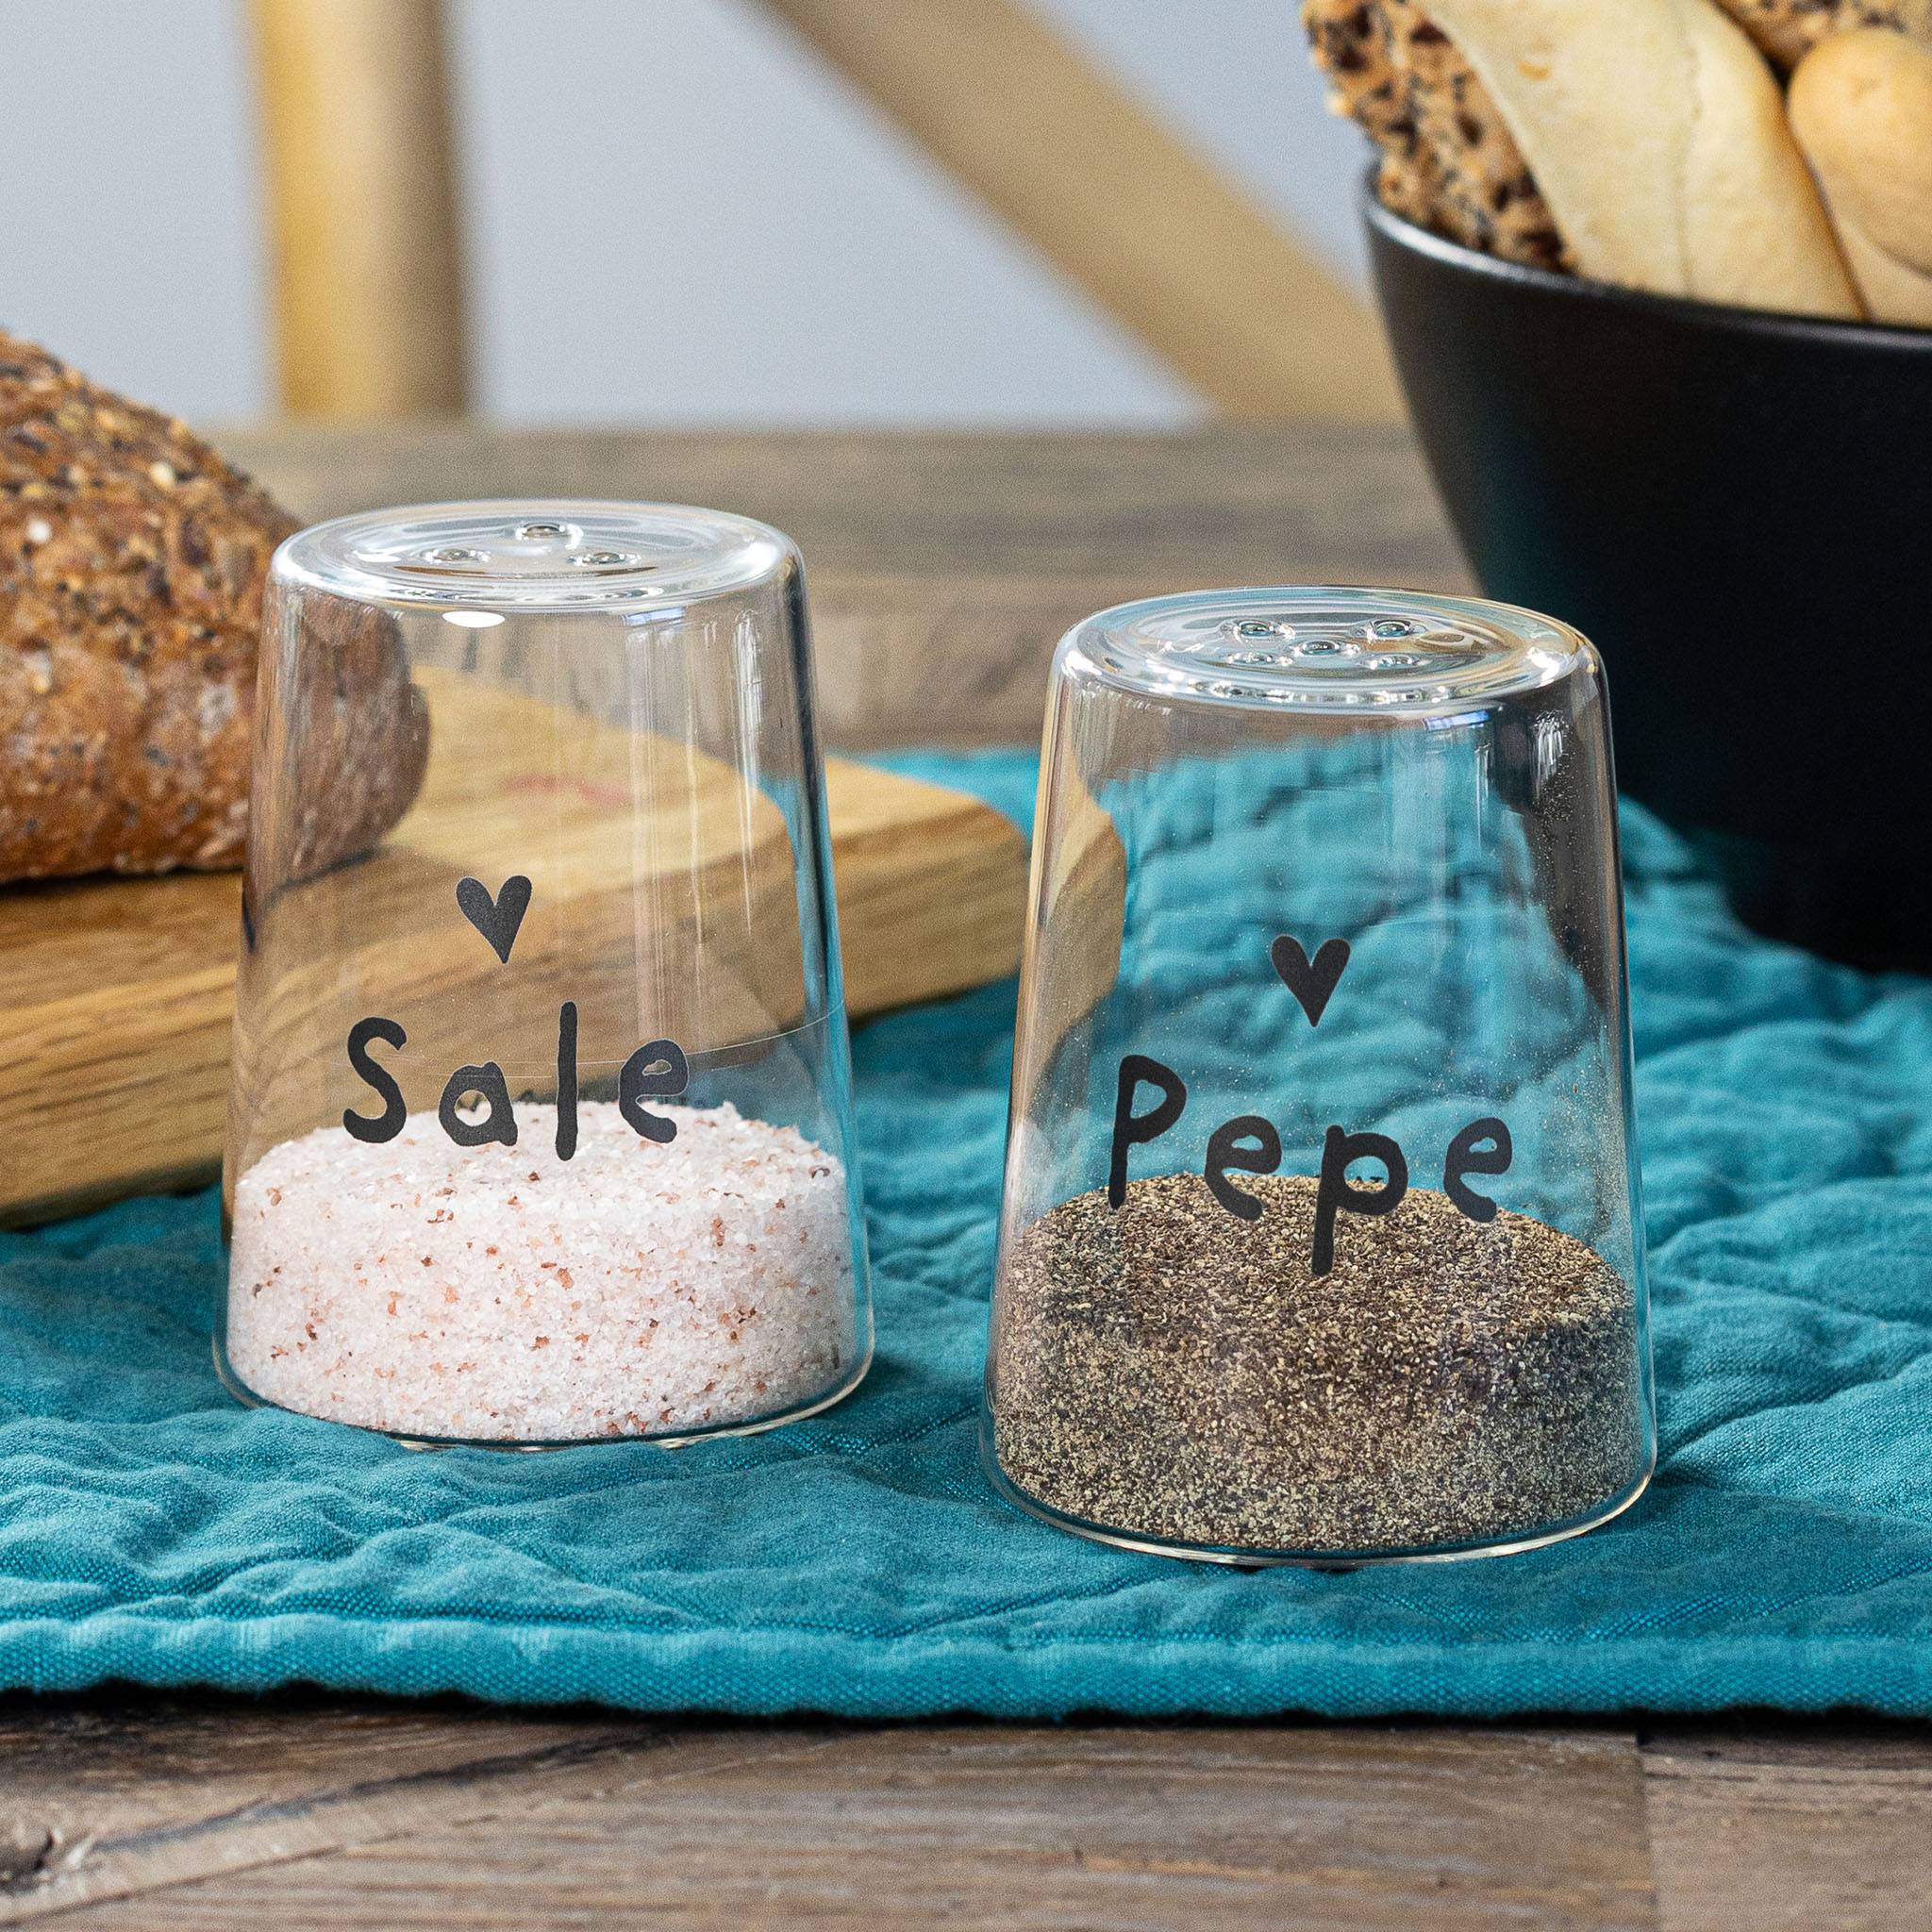 "Sale" and "Pepe" with Heart Salt & Pepper Set